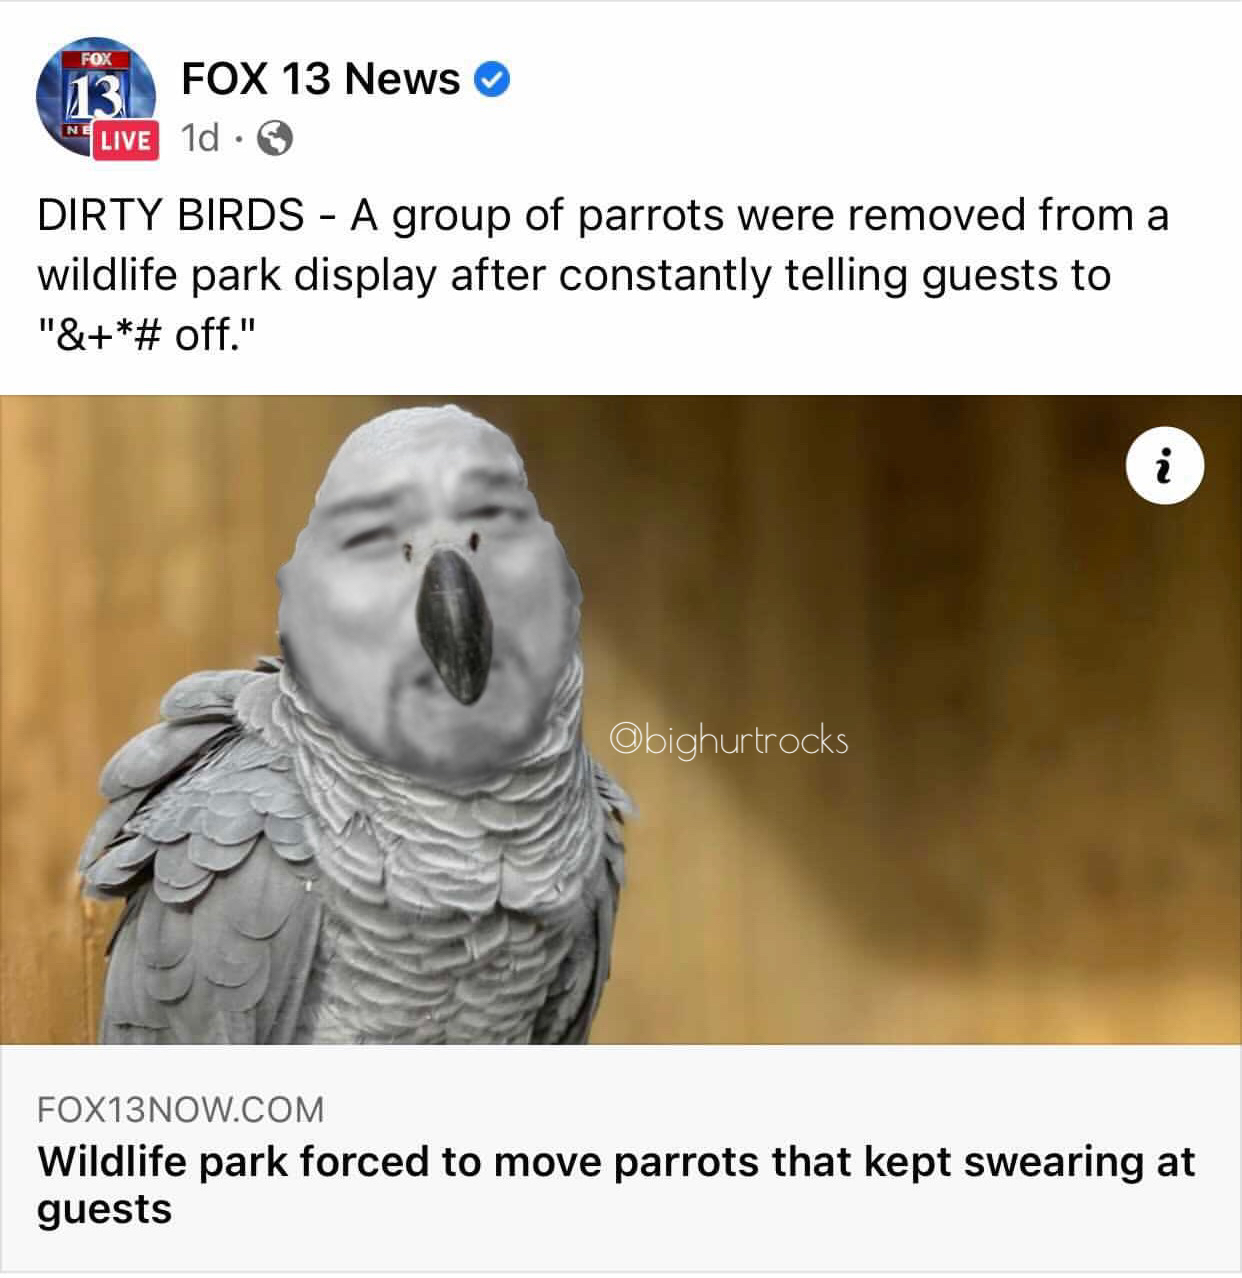 bighurtrocks- photo caption - 13 Fox 13 News Live 1d. Dirty Birds A group of parrots were removed from a wildlife park display after constantly telling guests to